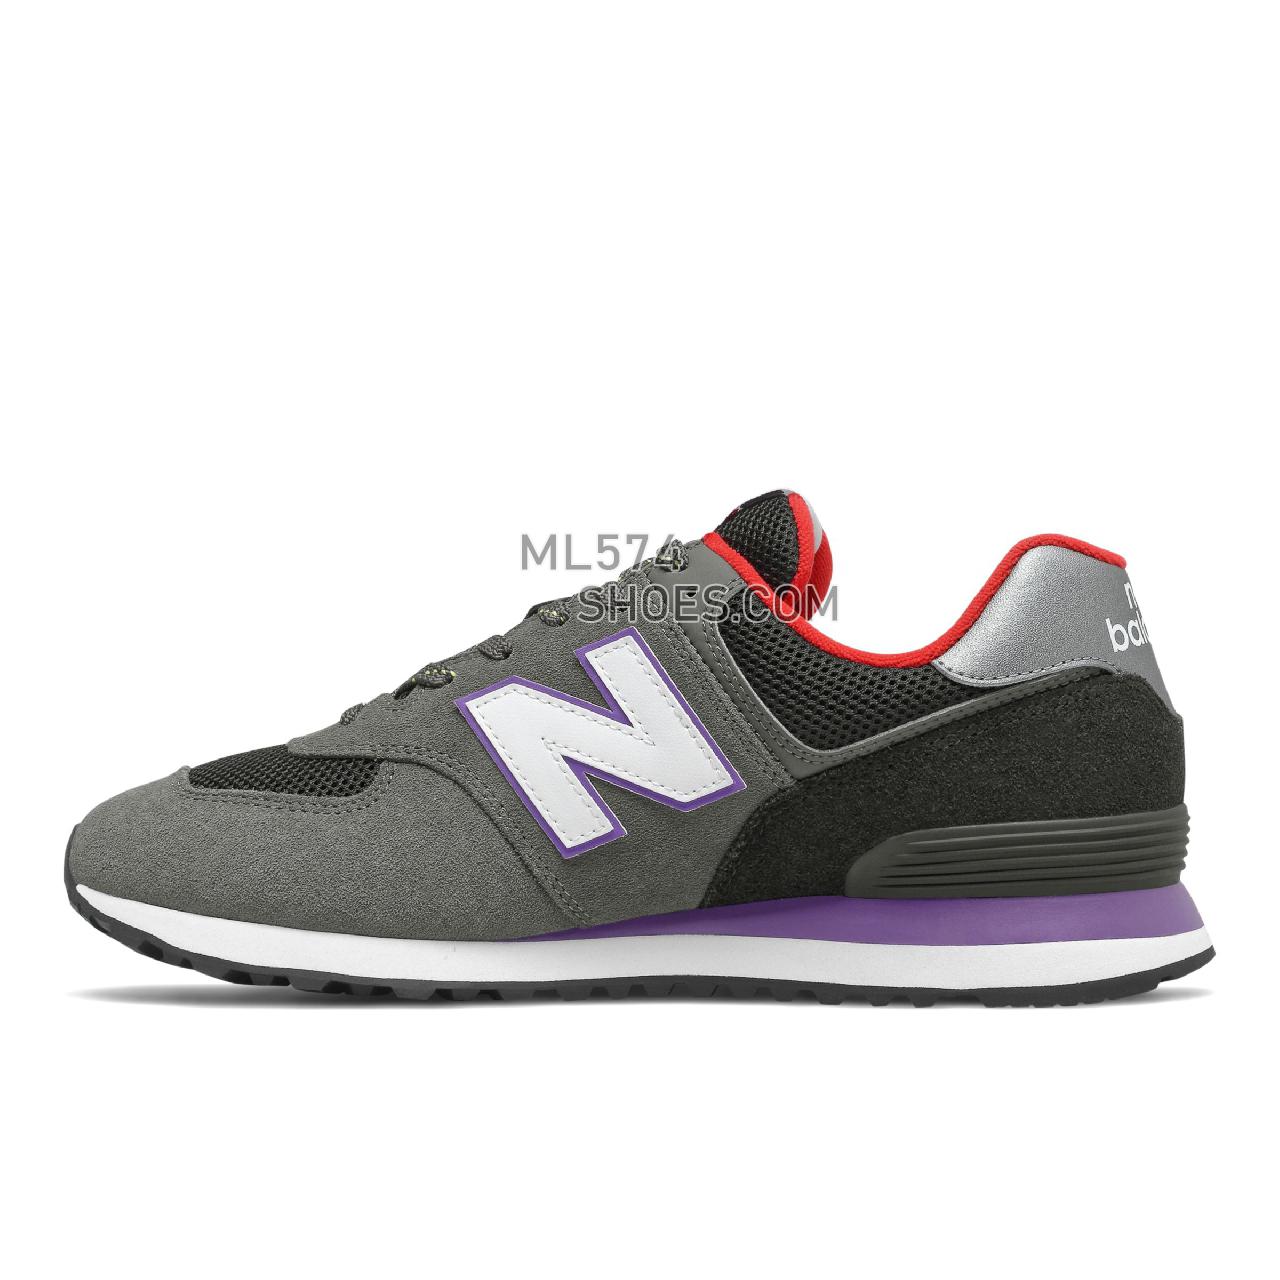 New Balance 574v2 - Men's Classic Sneakers - Prism Purple with First Light - ML574UC2